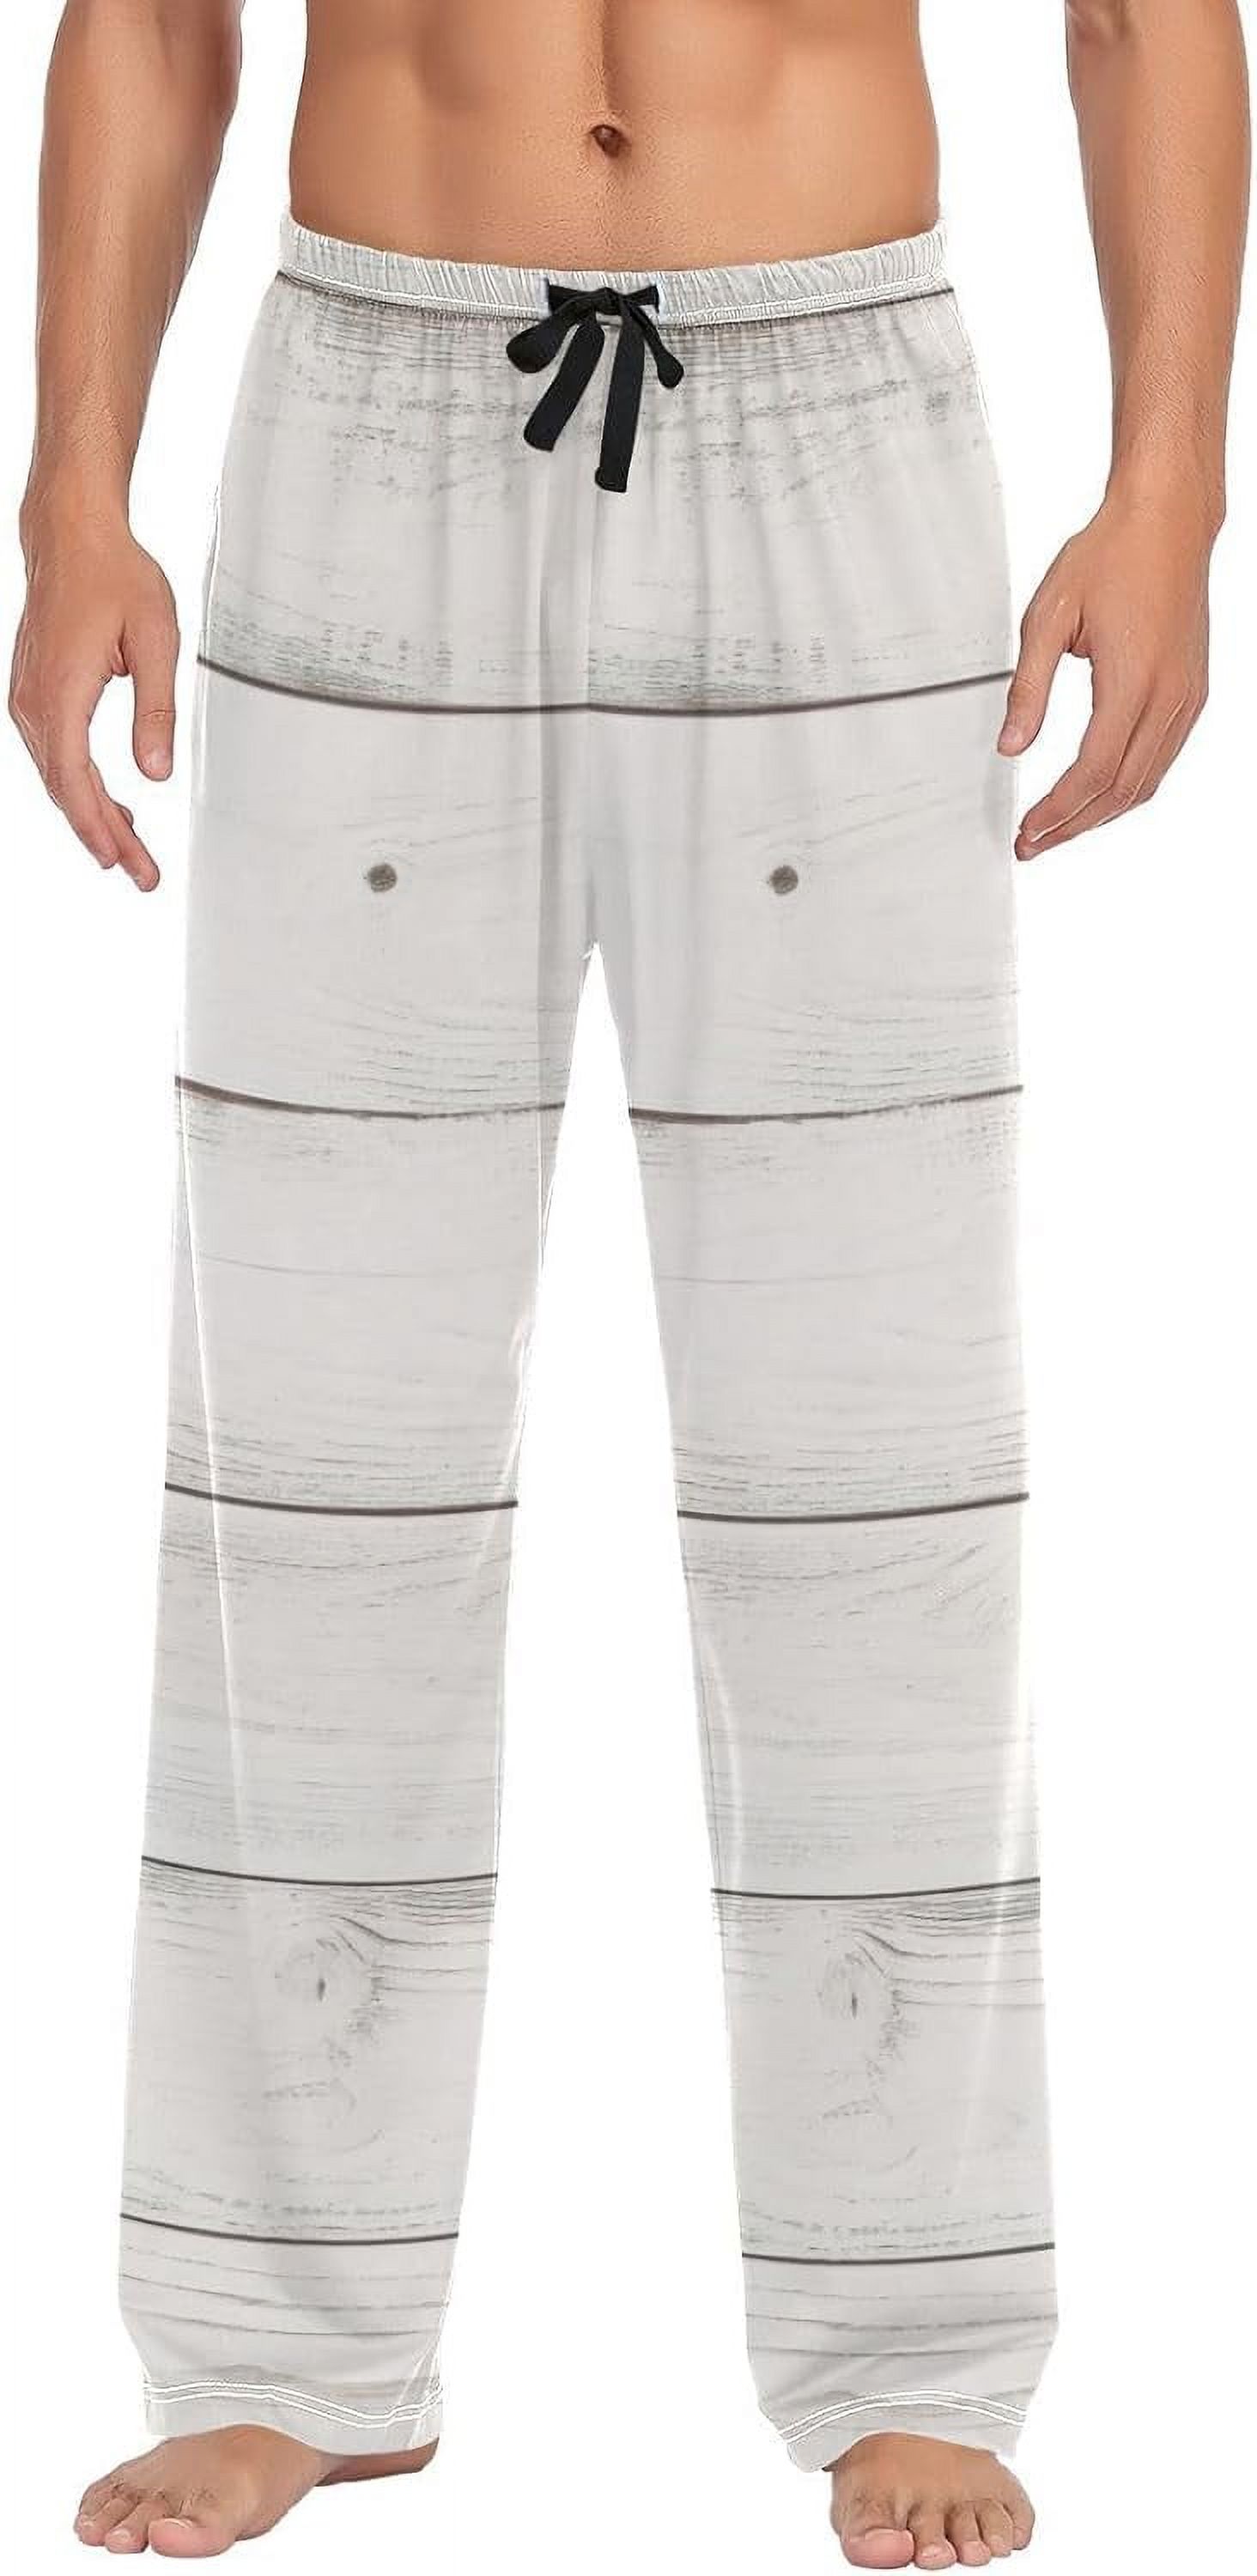 White Wood Texture Ghost Pajama Pants Men's Lounge Pants Light with ...